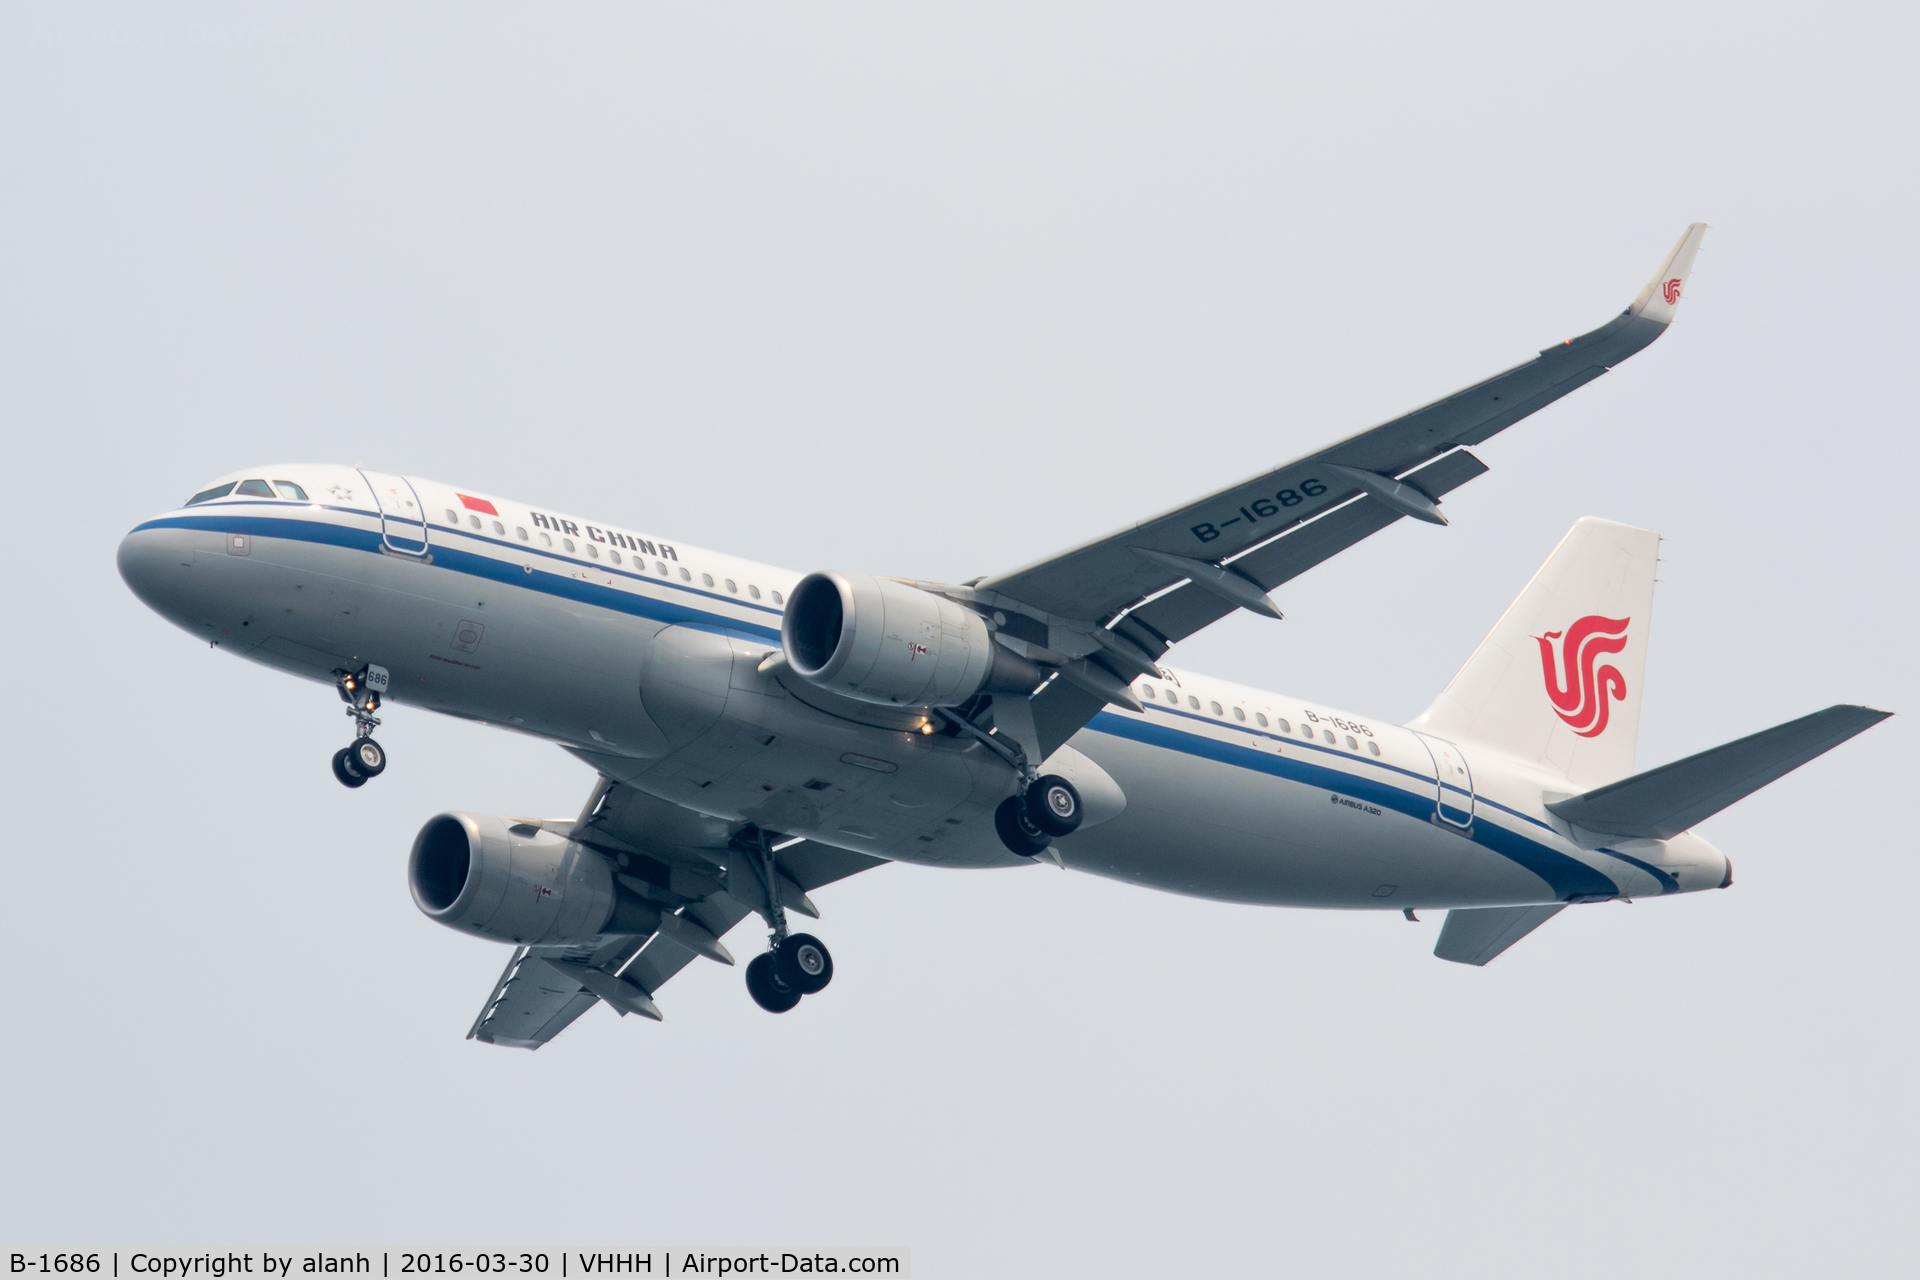 B-1686, 2015 Airbus A320-214 C/N 6466, On finals for Hong Kong, inbound from Chengdu Shuangliu Int'l